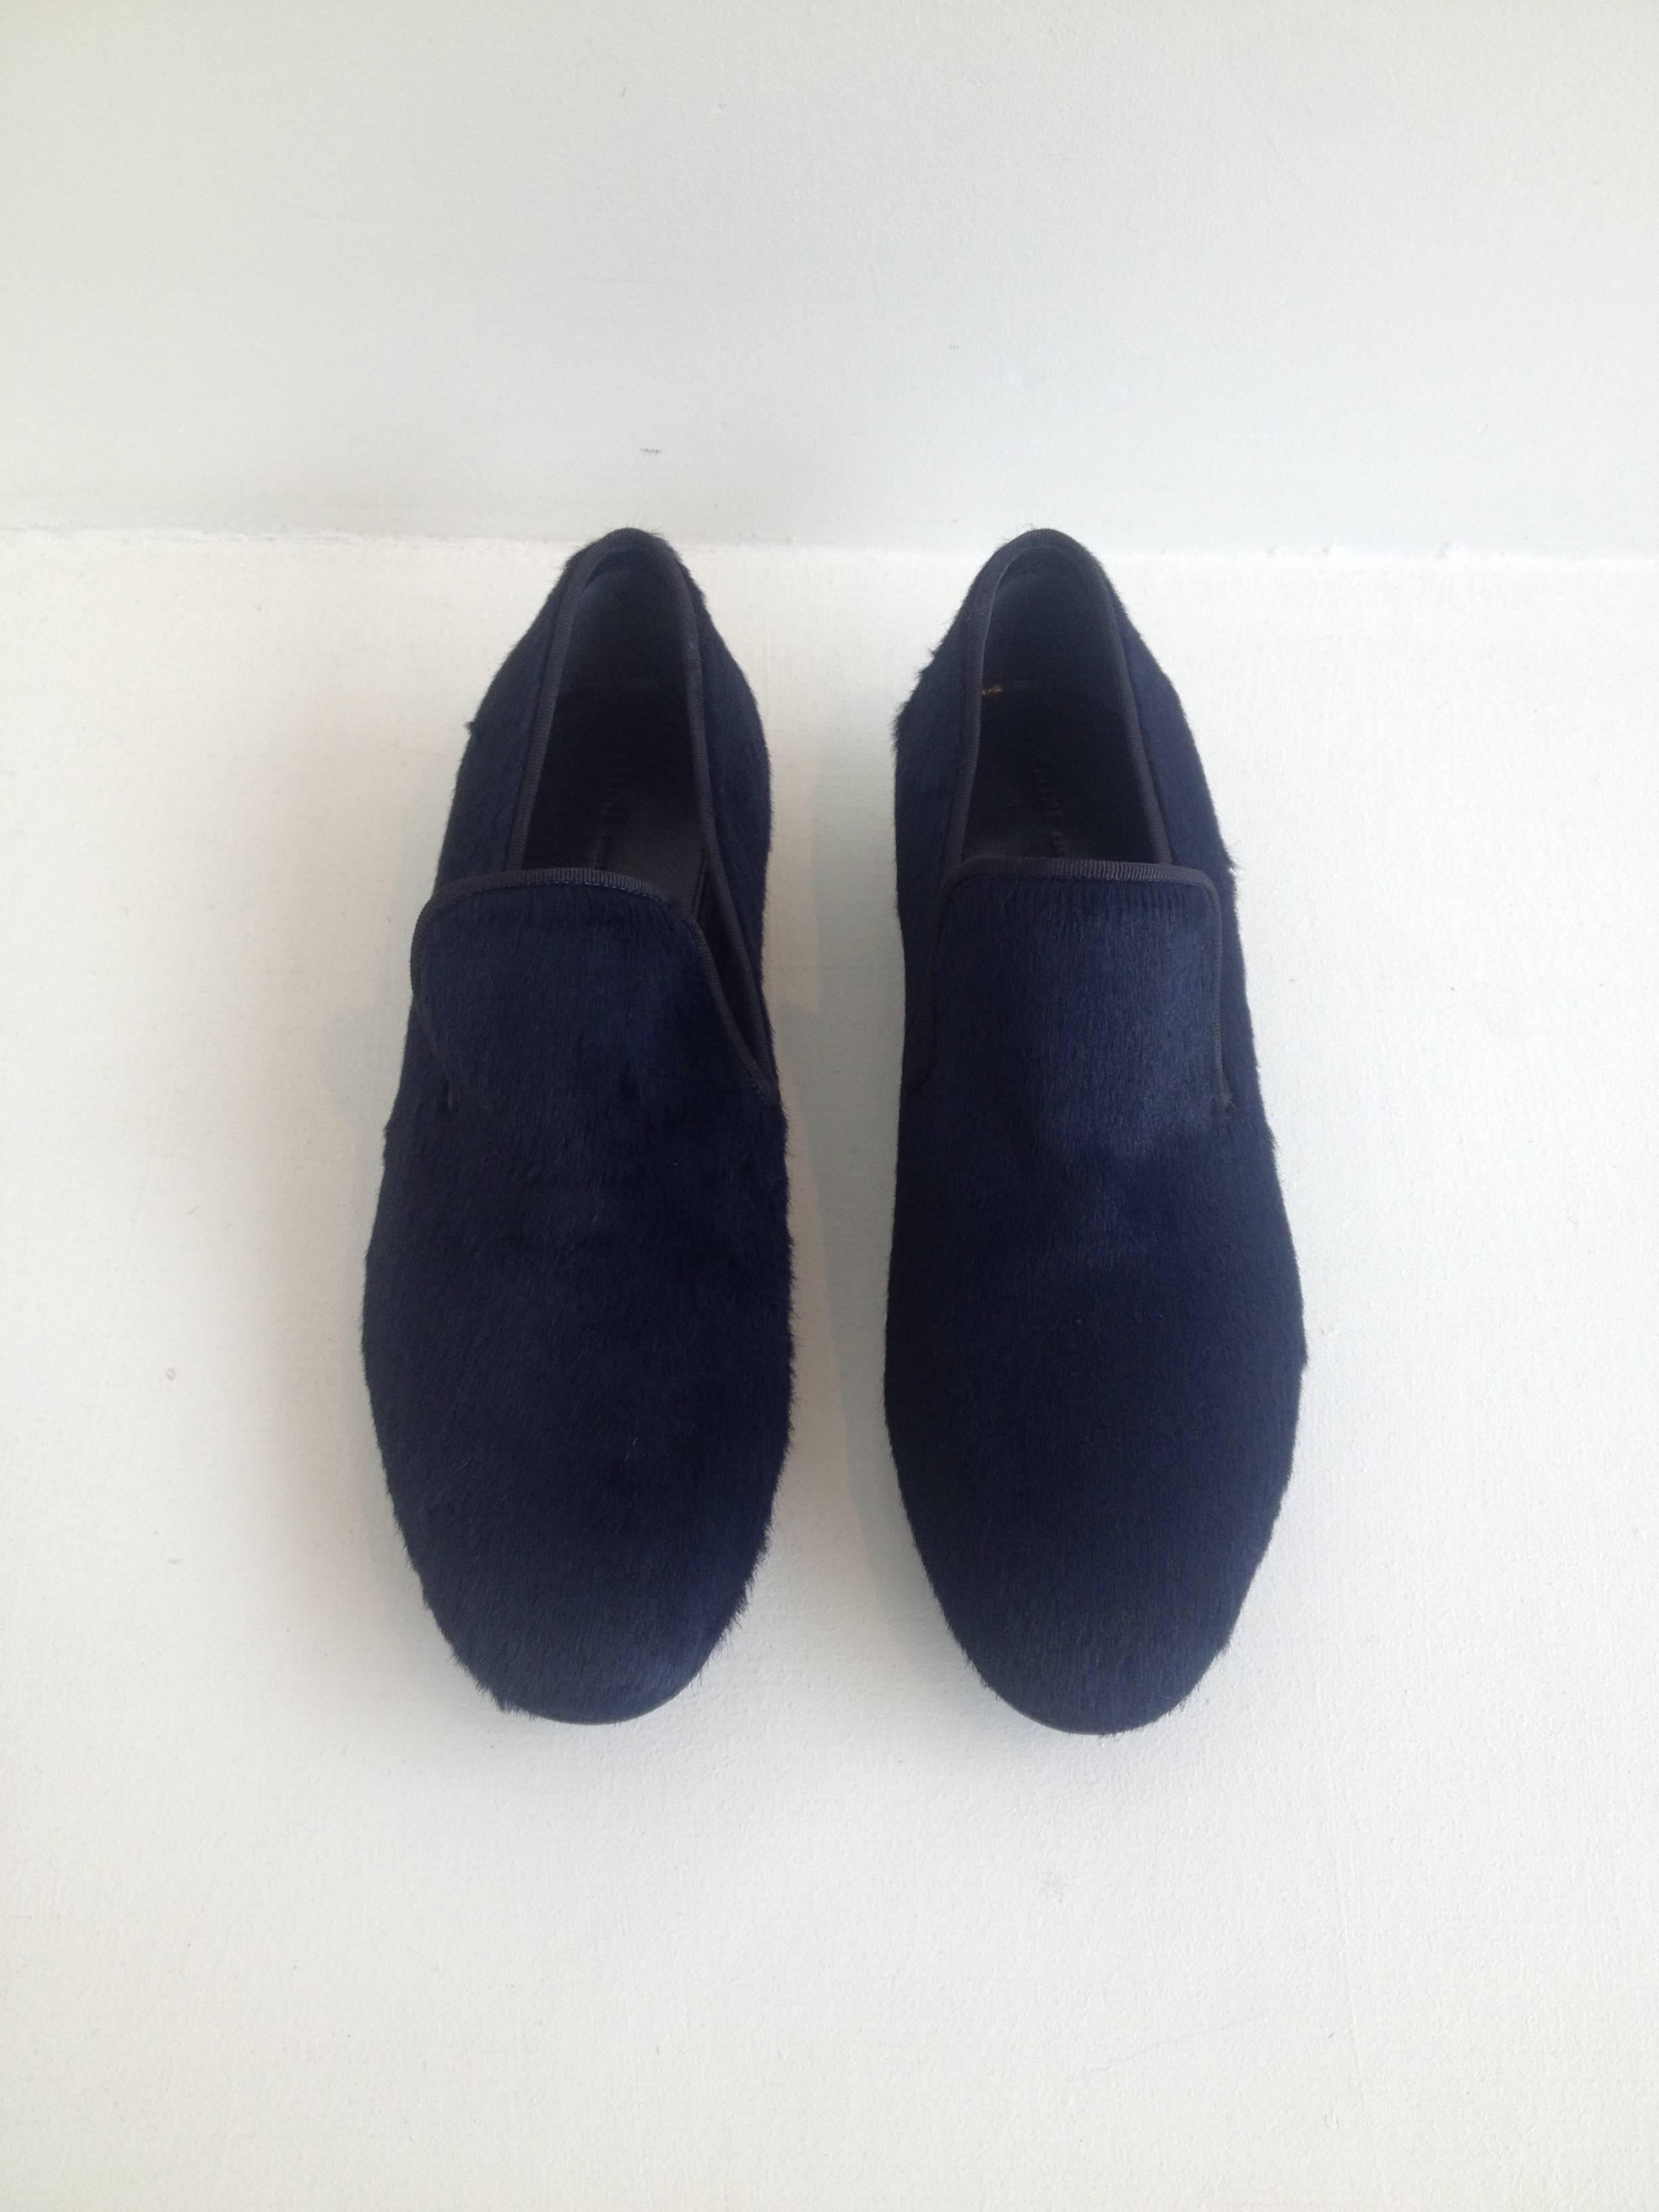 Both fabulous and sensible, these loafers are great for work or for play. The gorgeous navy blue ponyhair transitions from season to season, while the smoking slipper style is such a staple. The heel is three quarters of an inch, and the rounded toe